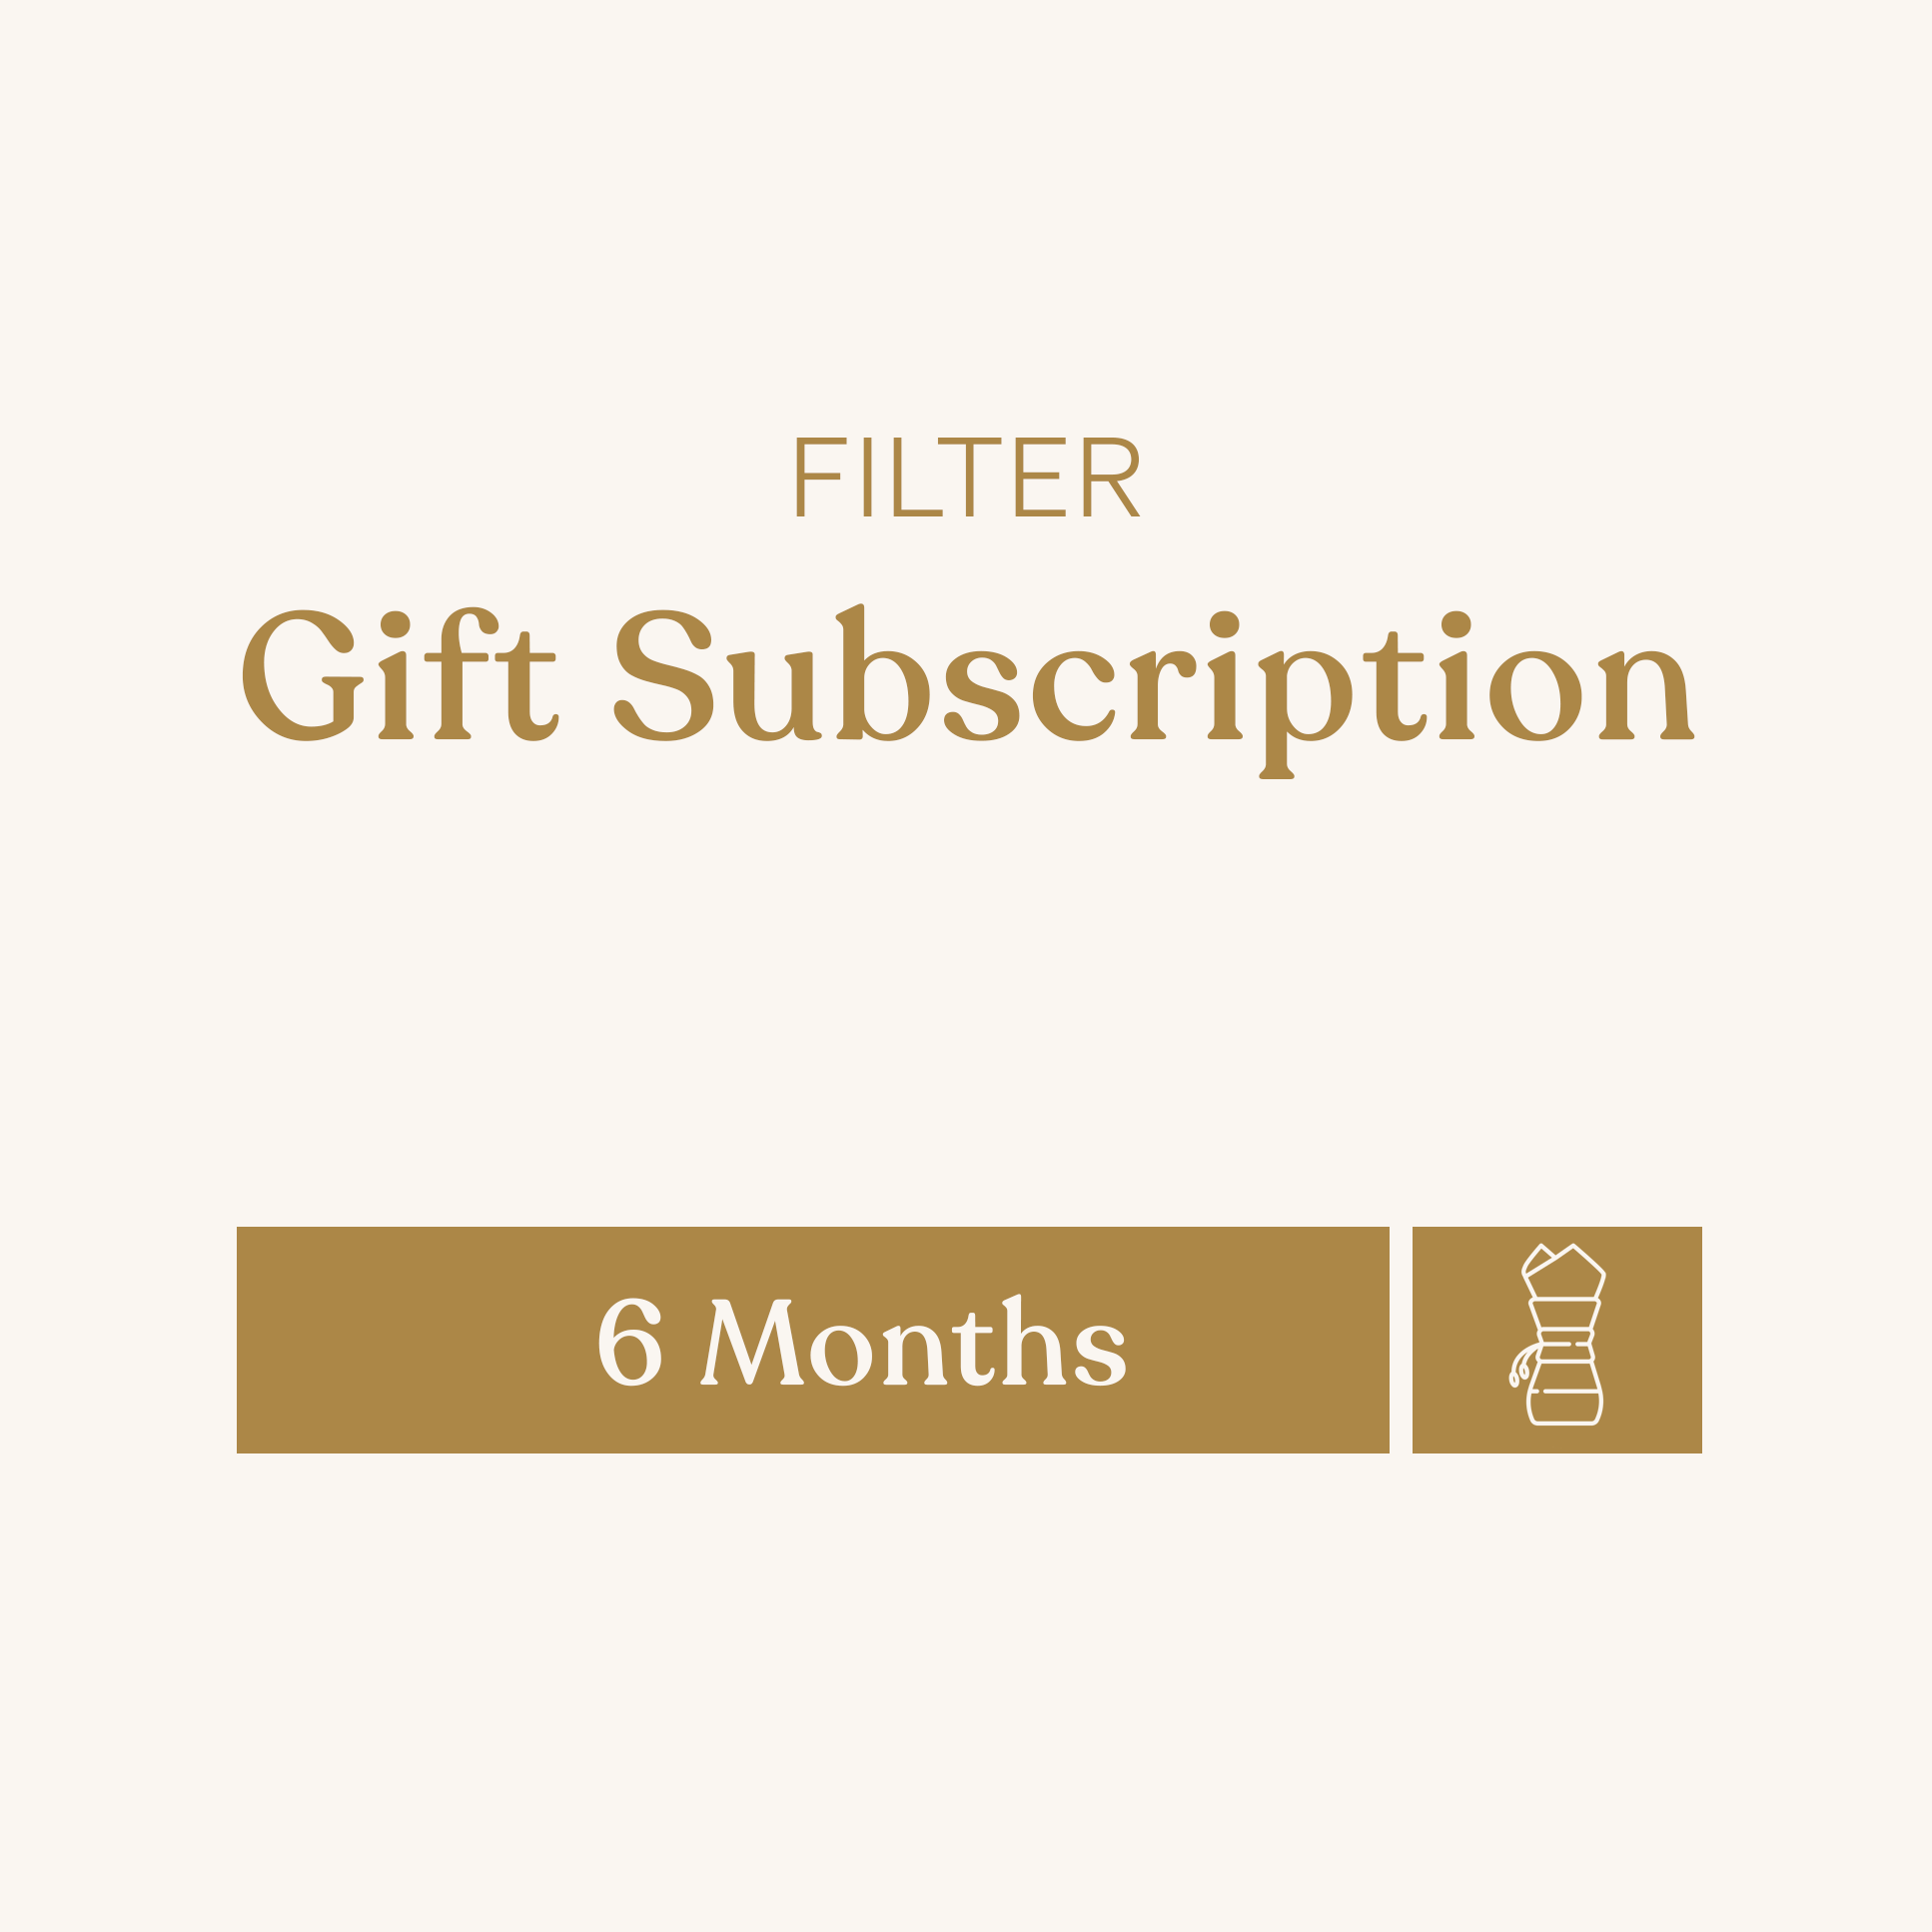 6 Months Filter Gift Subscription